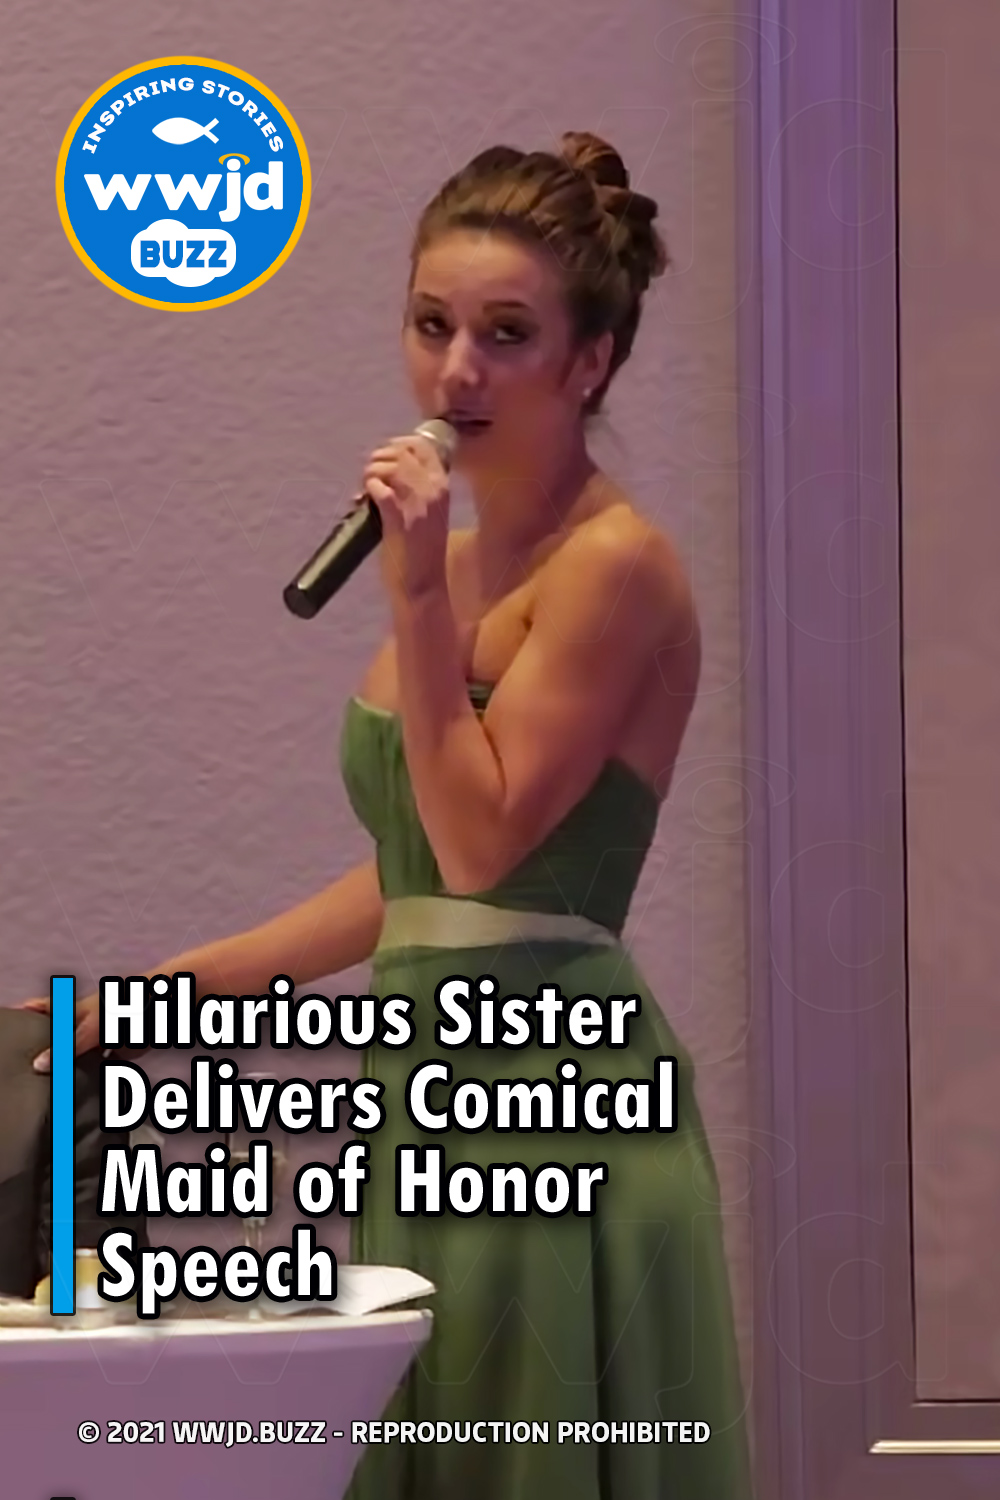 Hilarious Sister Delivers Comical Maid of Honor Speech